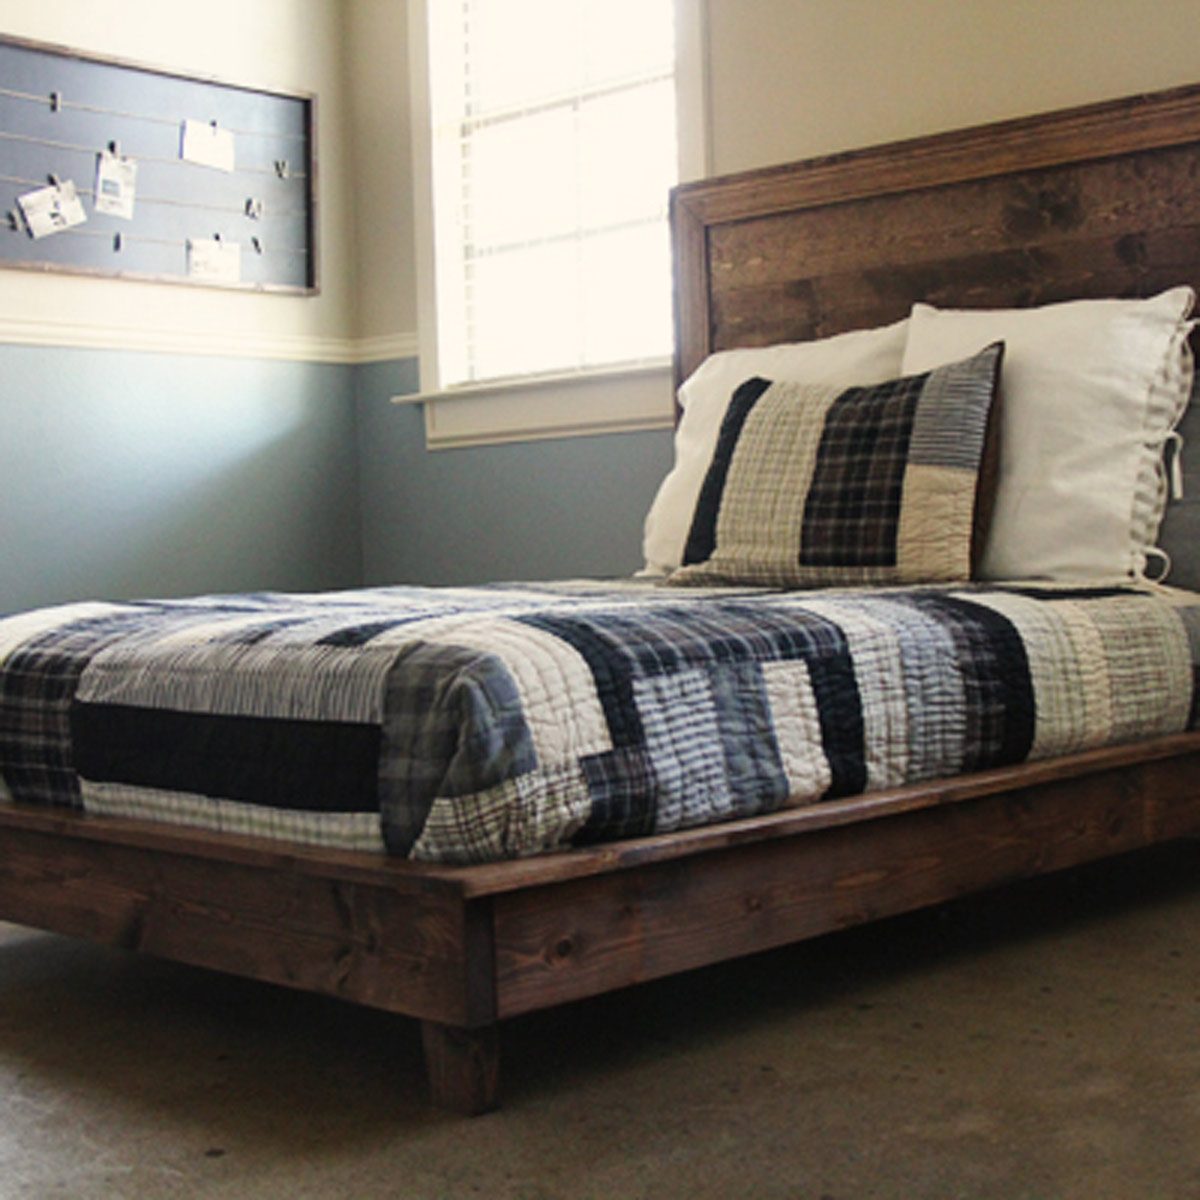 10 Awesome DIY Platform Bed Designs — The Family Handyman